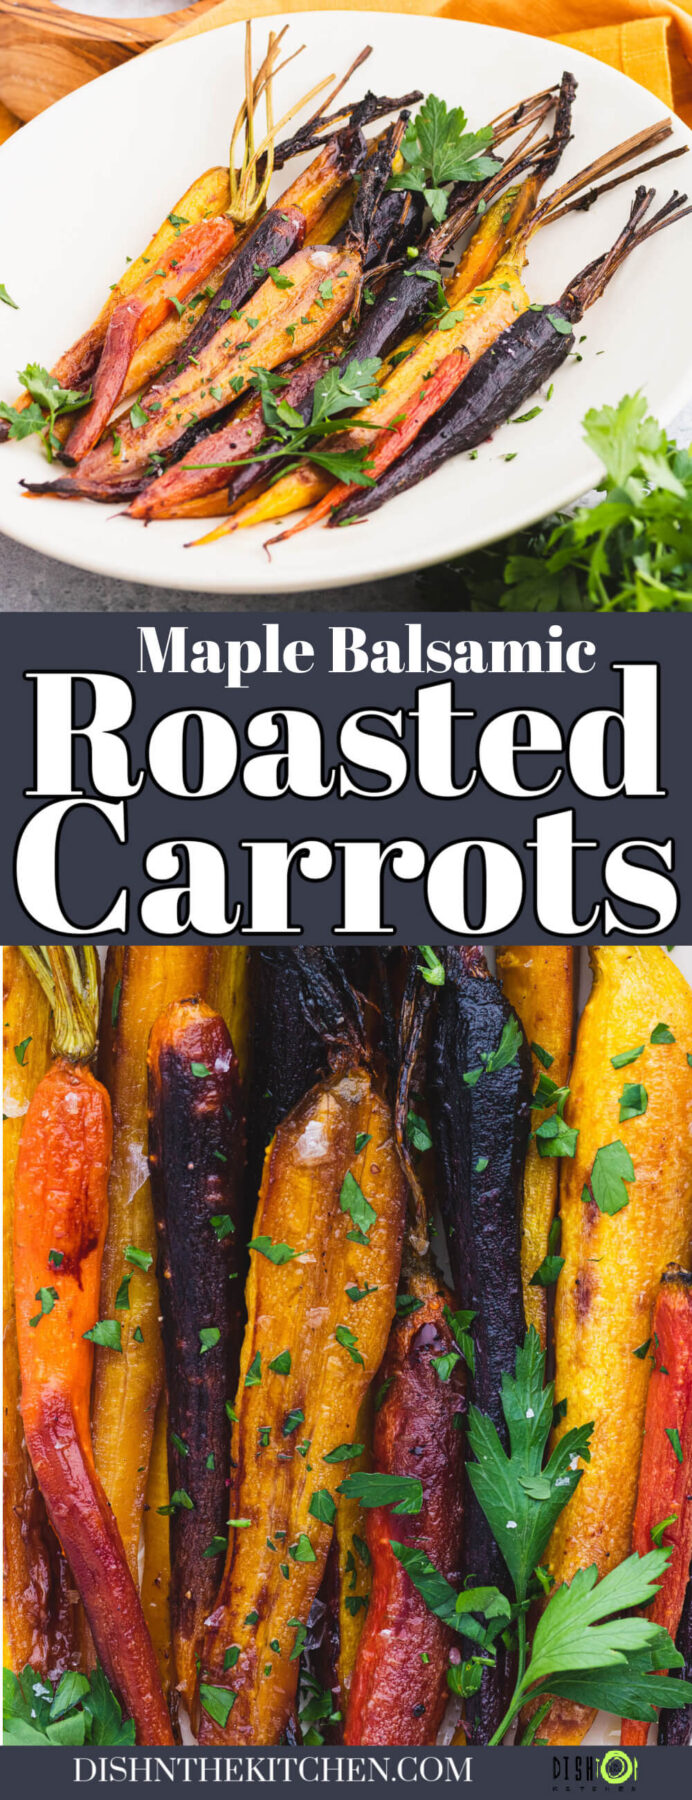 Pinterest image of colourful Maple Balsamic Roasted Carrots garnished with coarse salt and chopped Italian parsley.